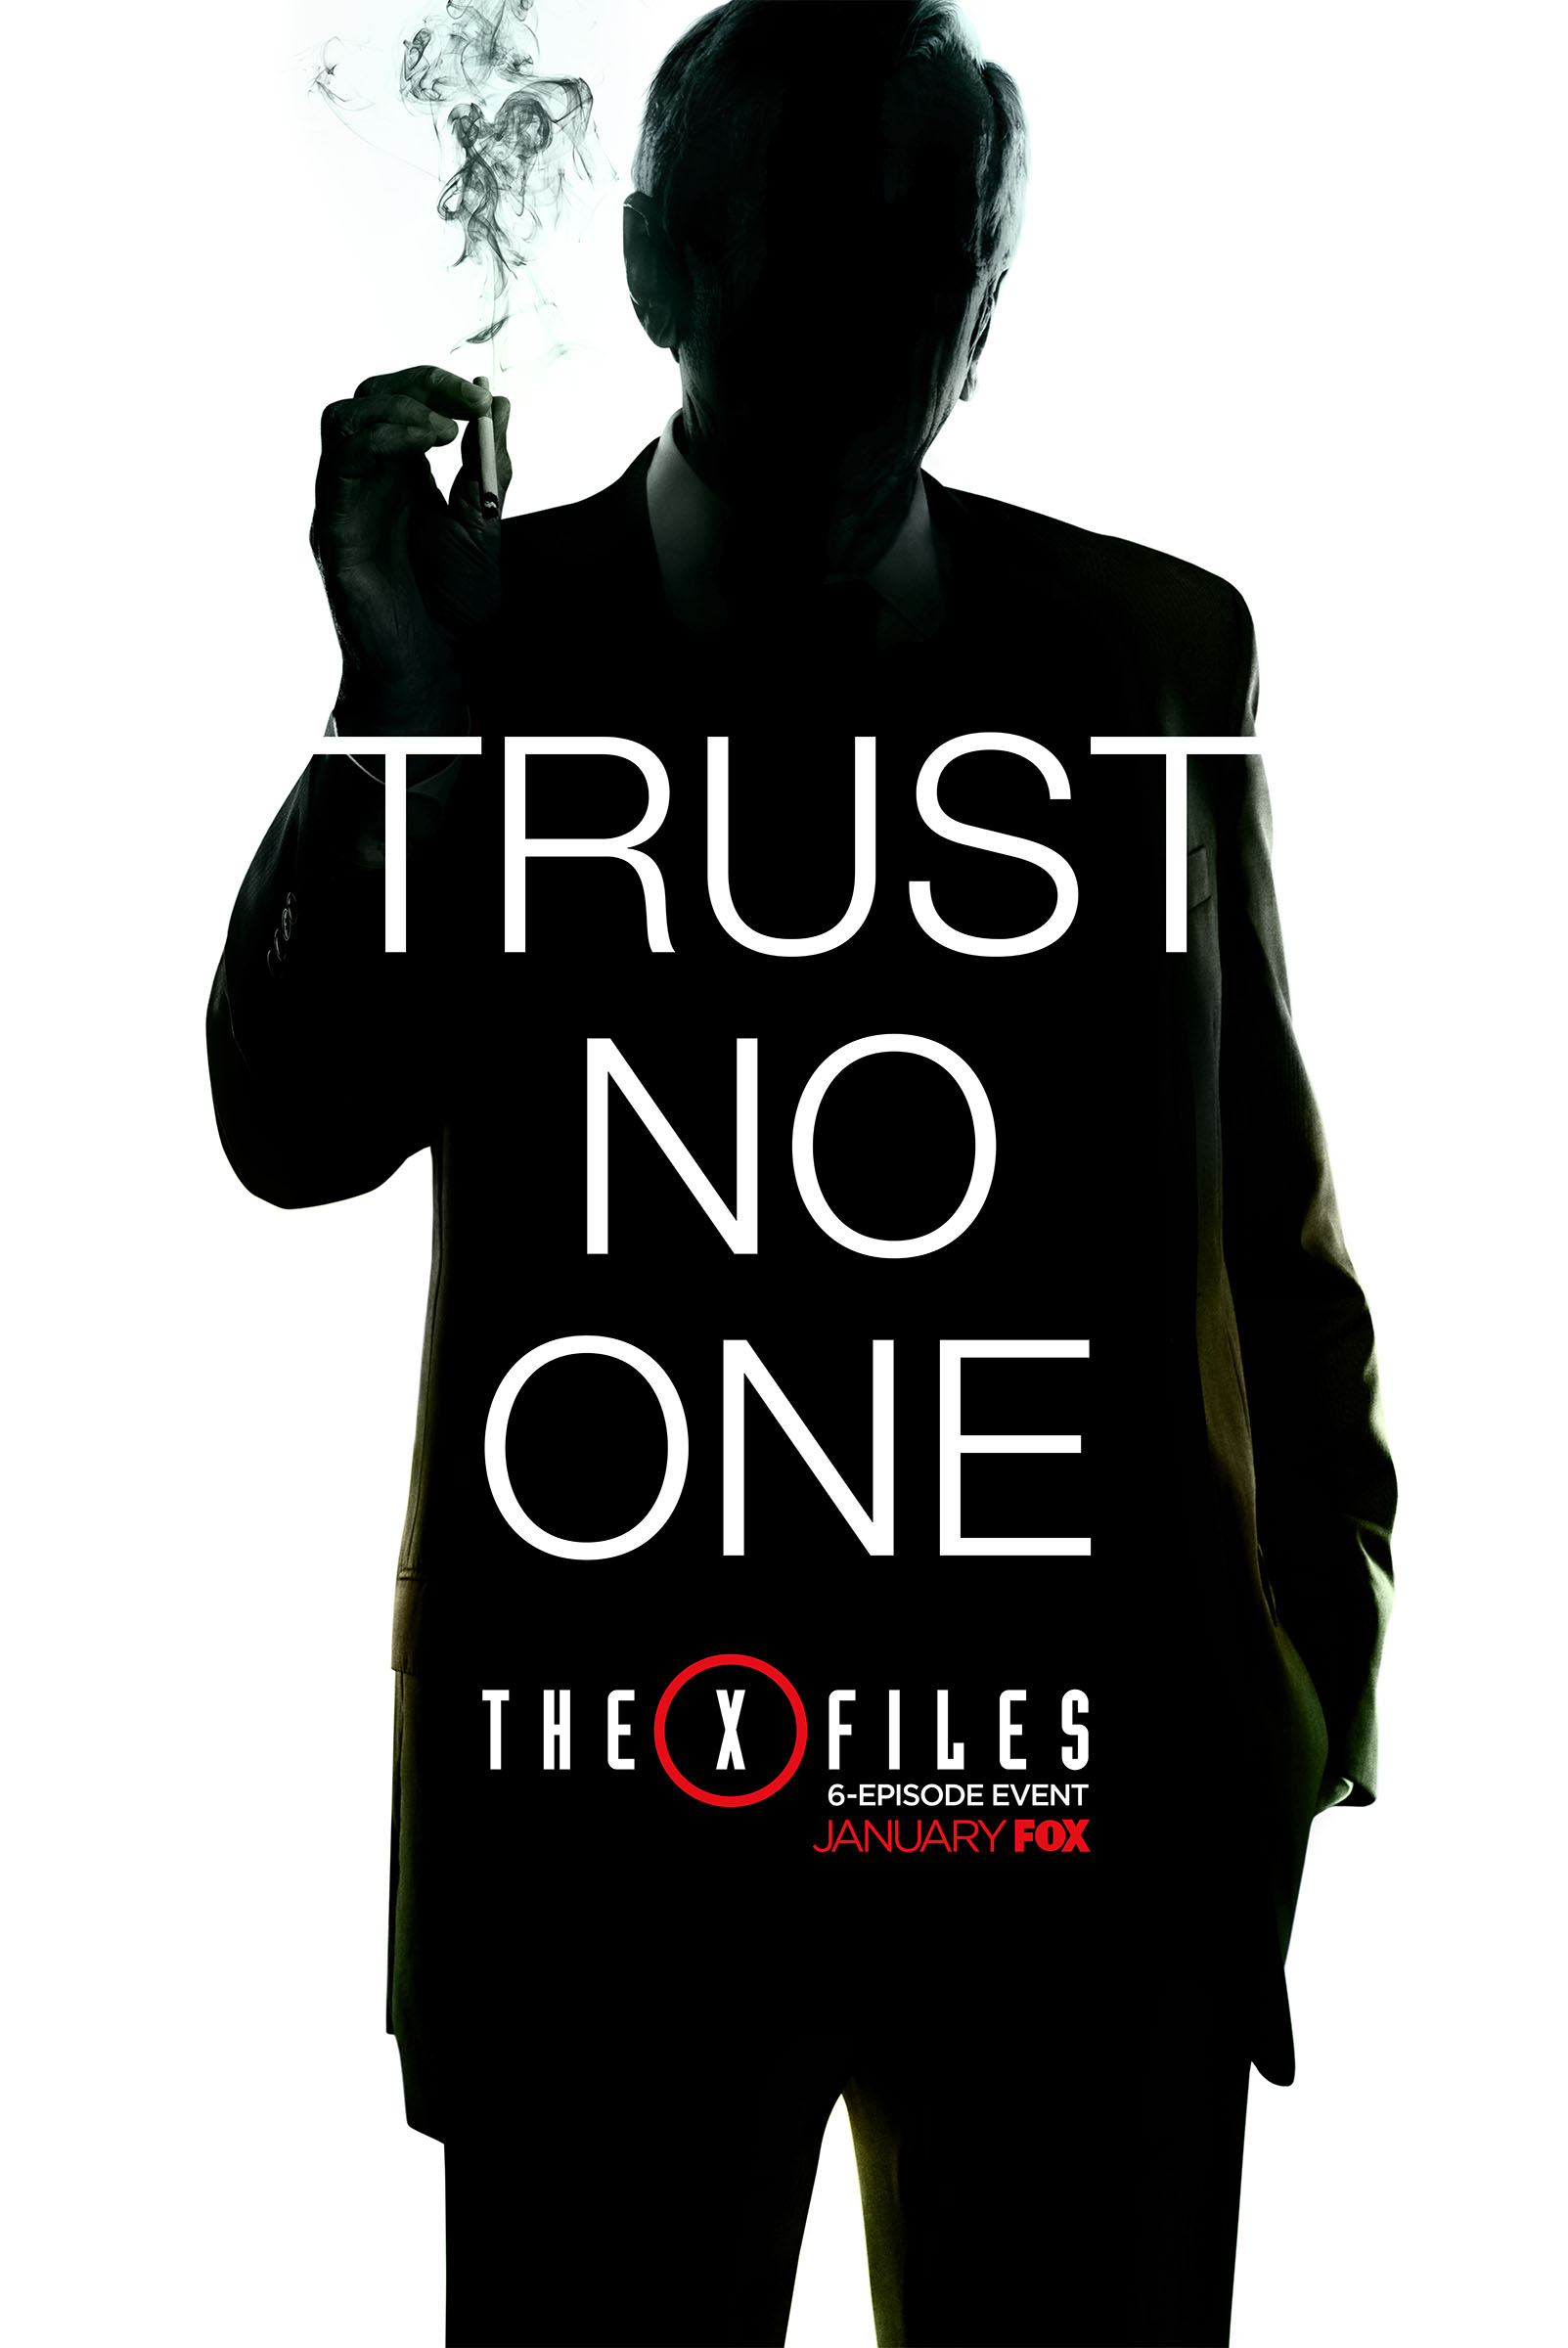 the-x-files-cigarette-smoking-man-tv-show-poster-01-1603×2400